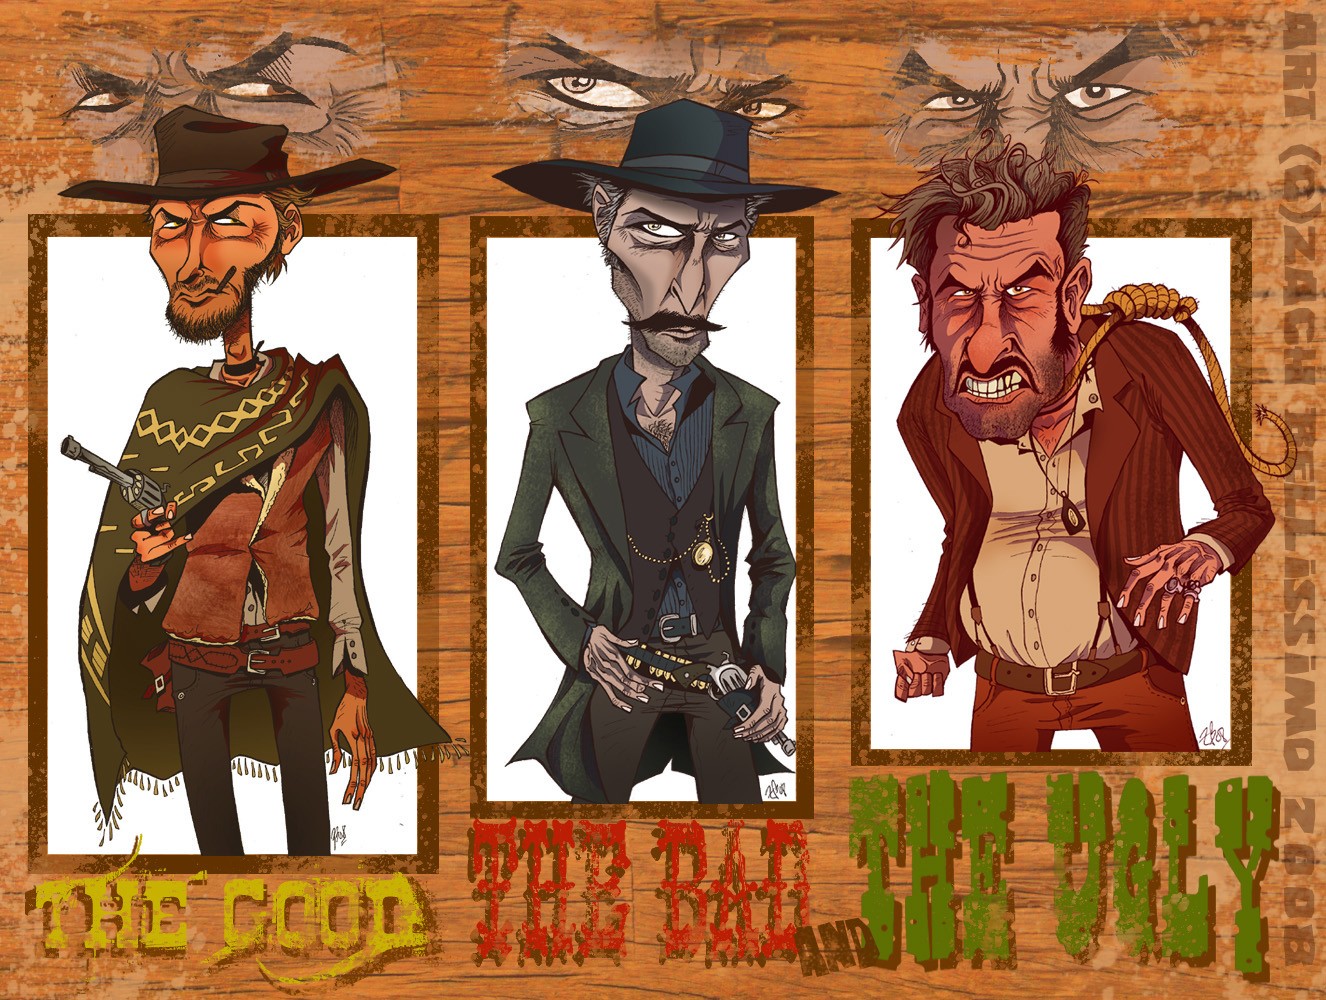 General 1326x1000 The Good, the Bad and the Ugly Clint Eastwood Lee Van Cleef Eli Wallach movies artwork western